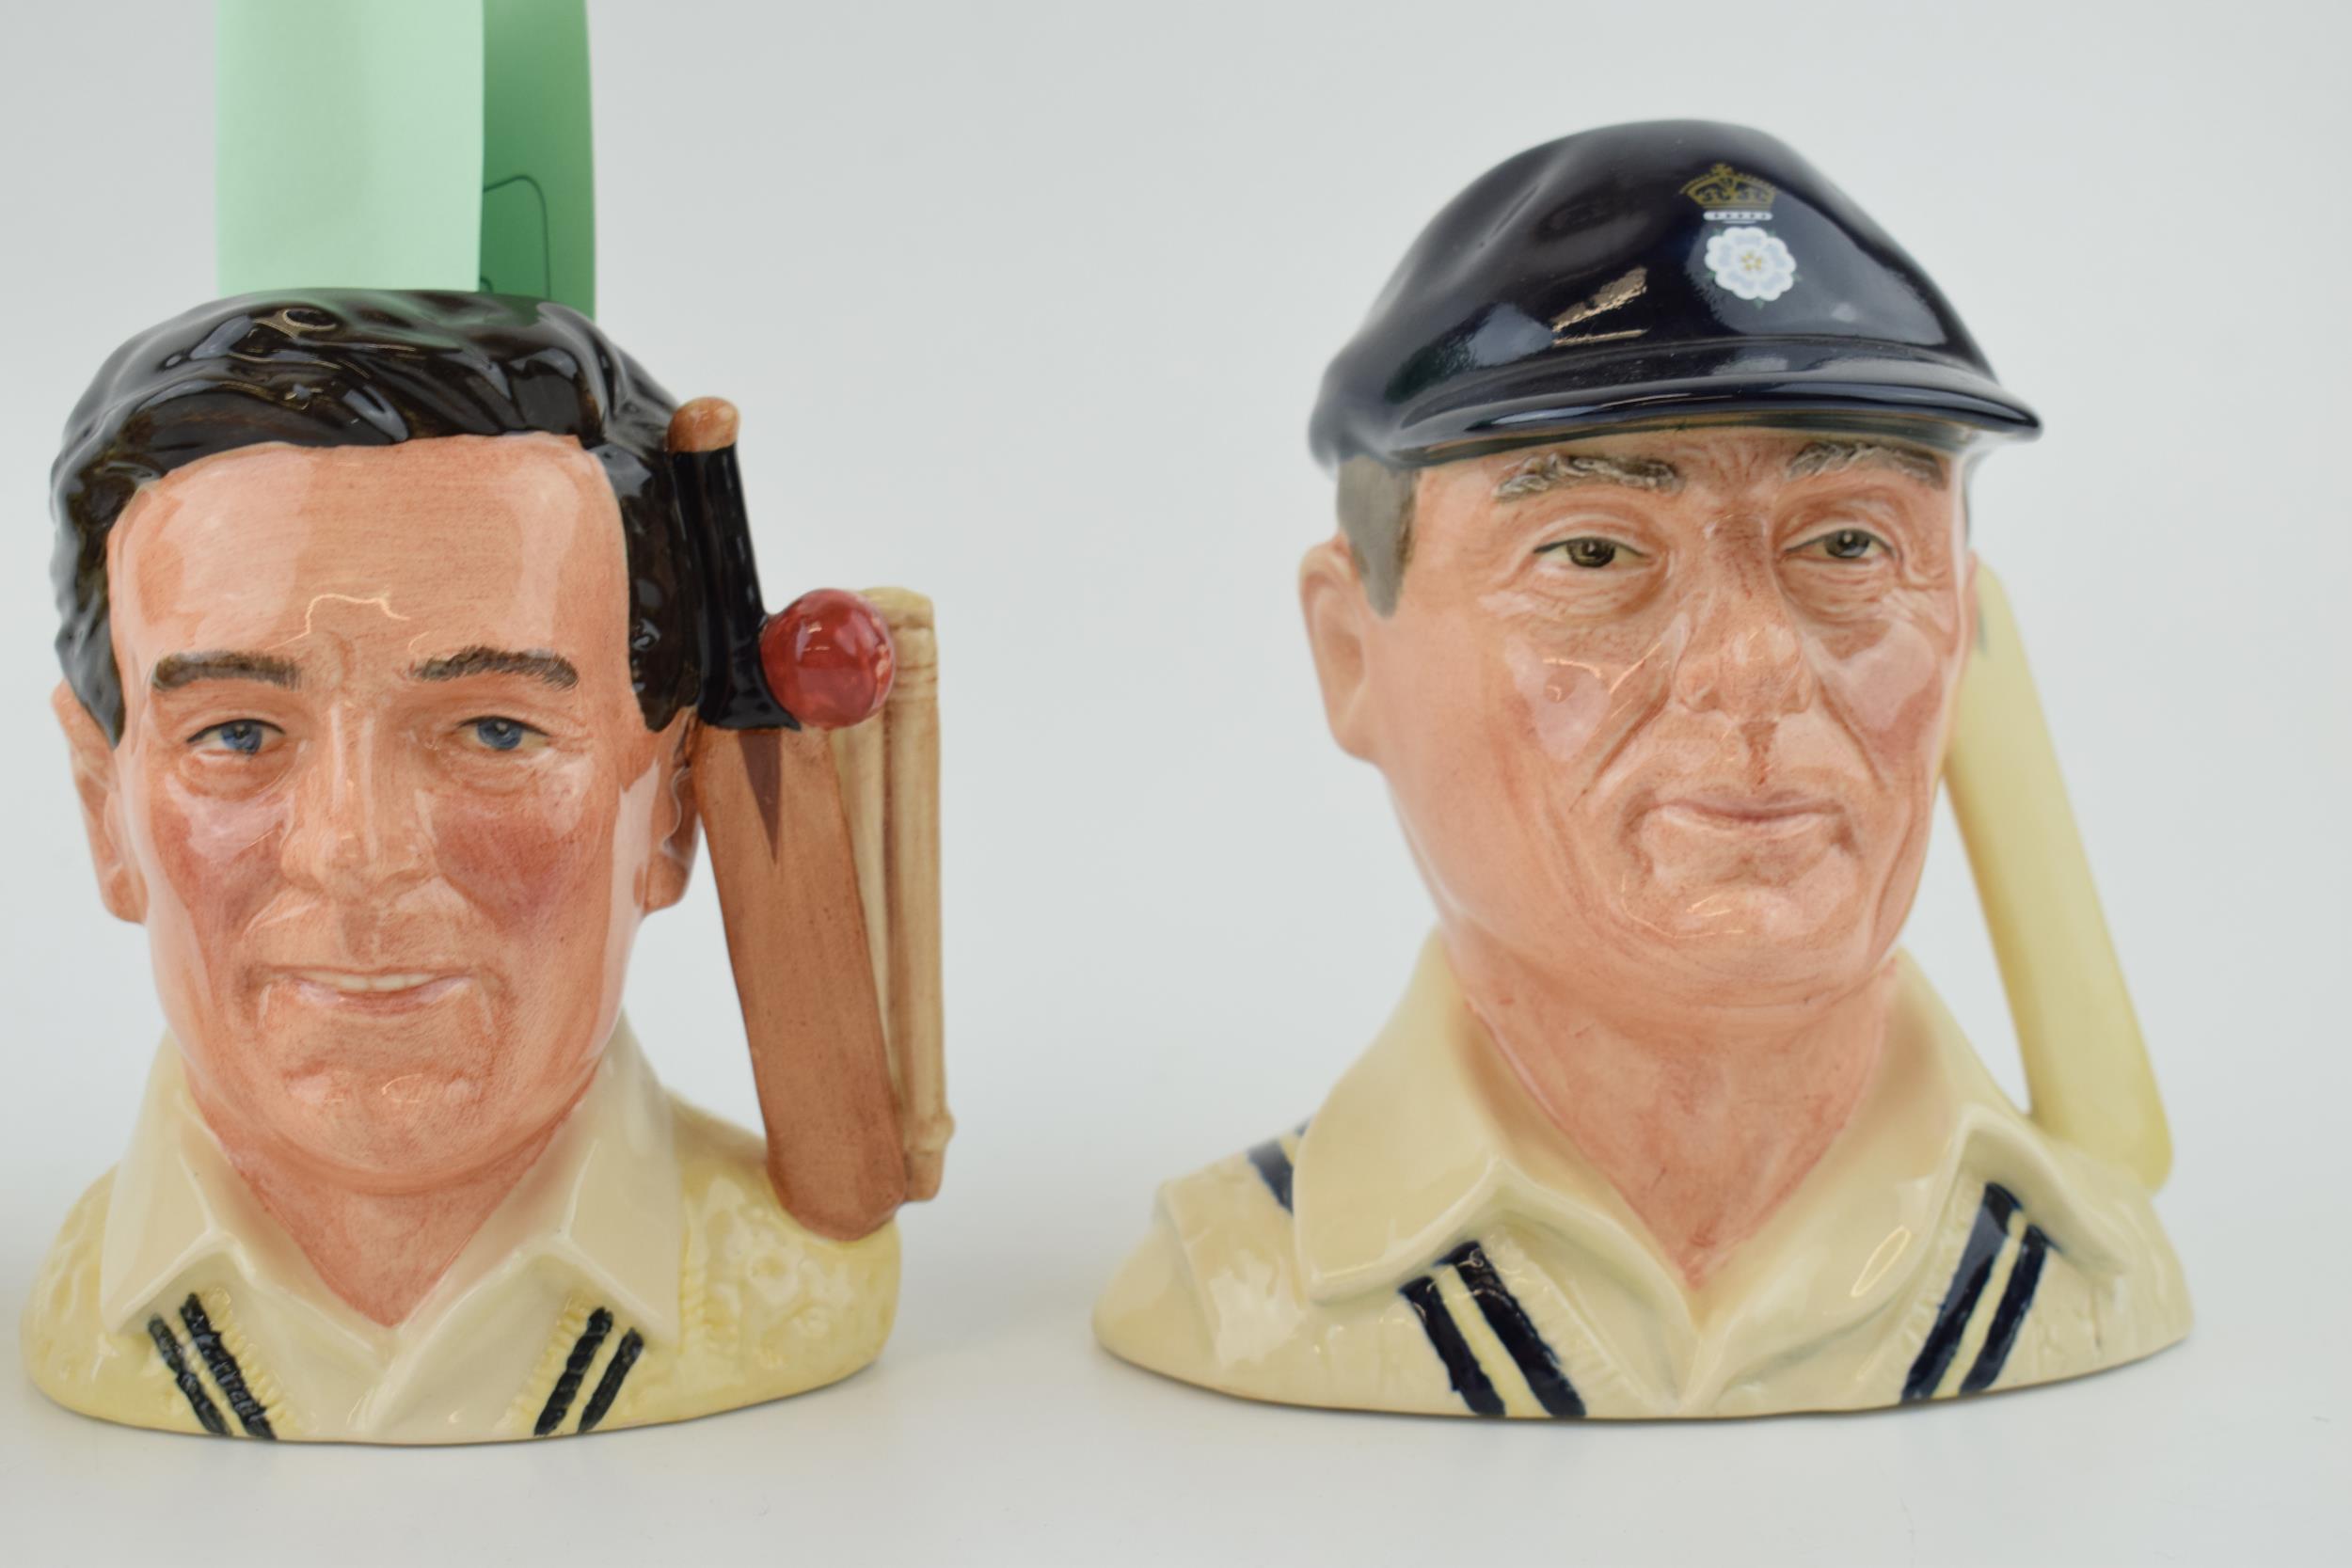 Small Royal Doulton character jugs of cricketers to include Denis Compton, the Hampshire Cricketer - Image 3 of 3